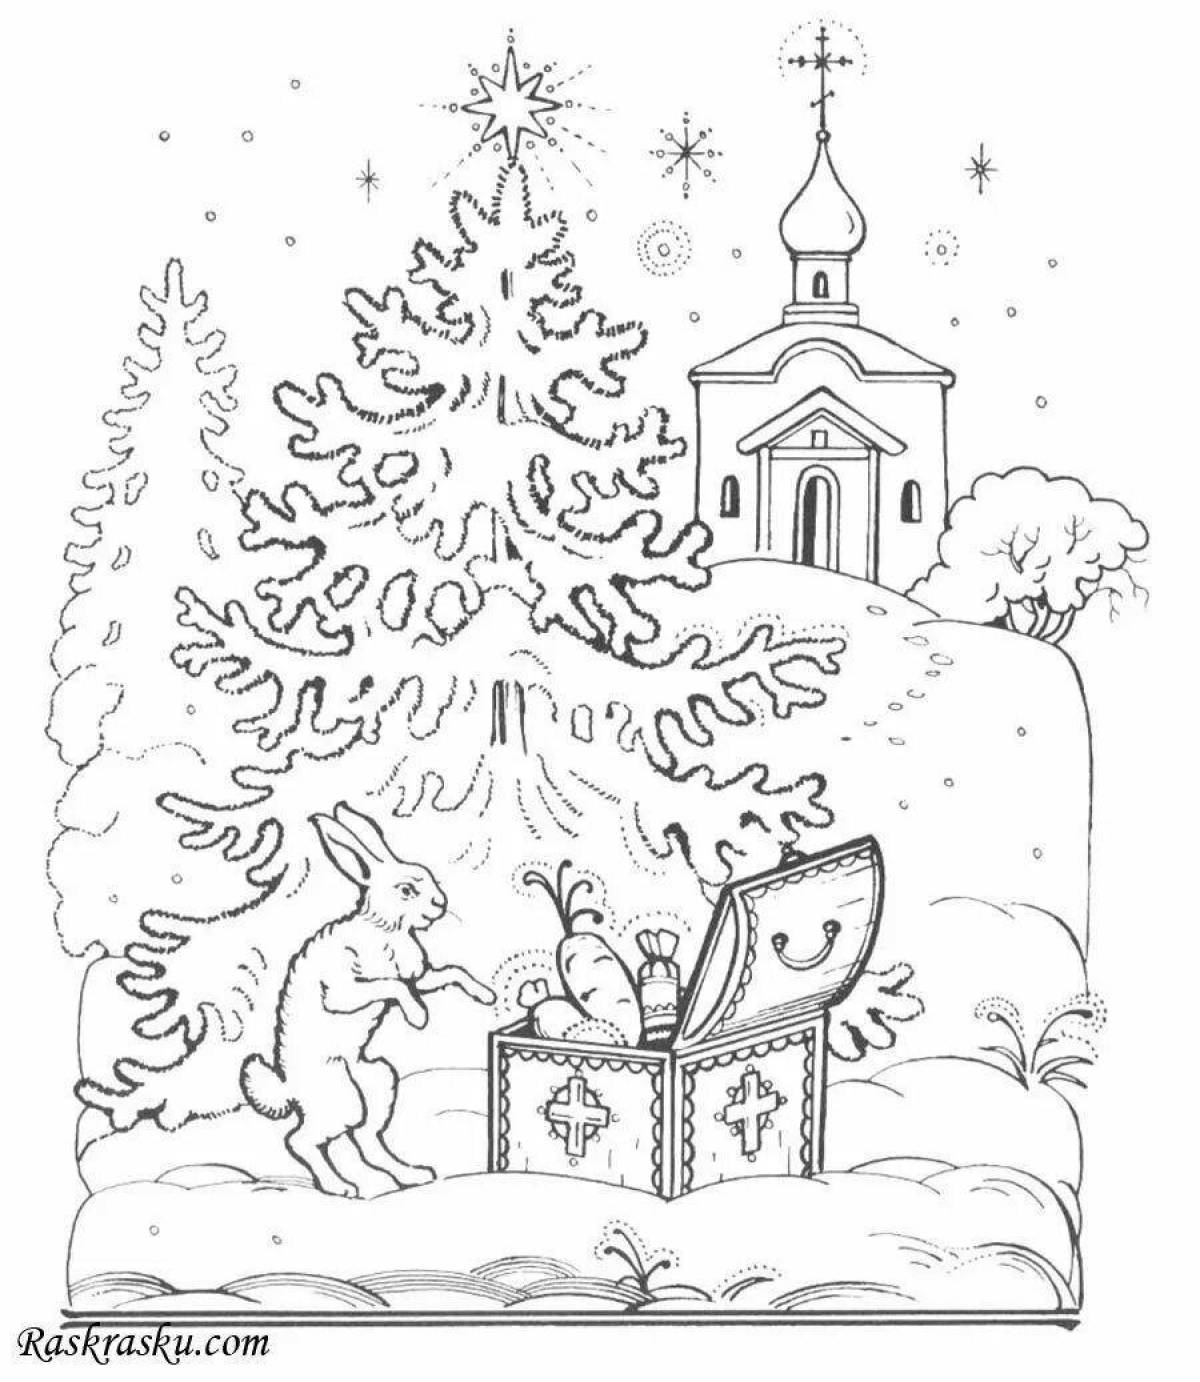 Shiny christening card coloring page